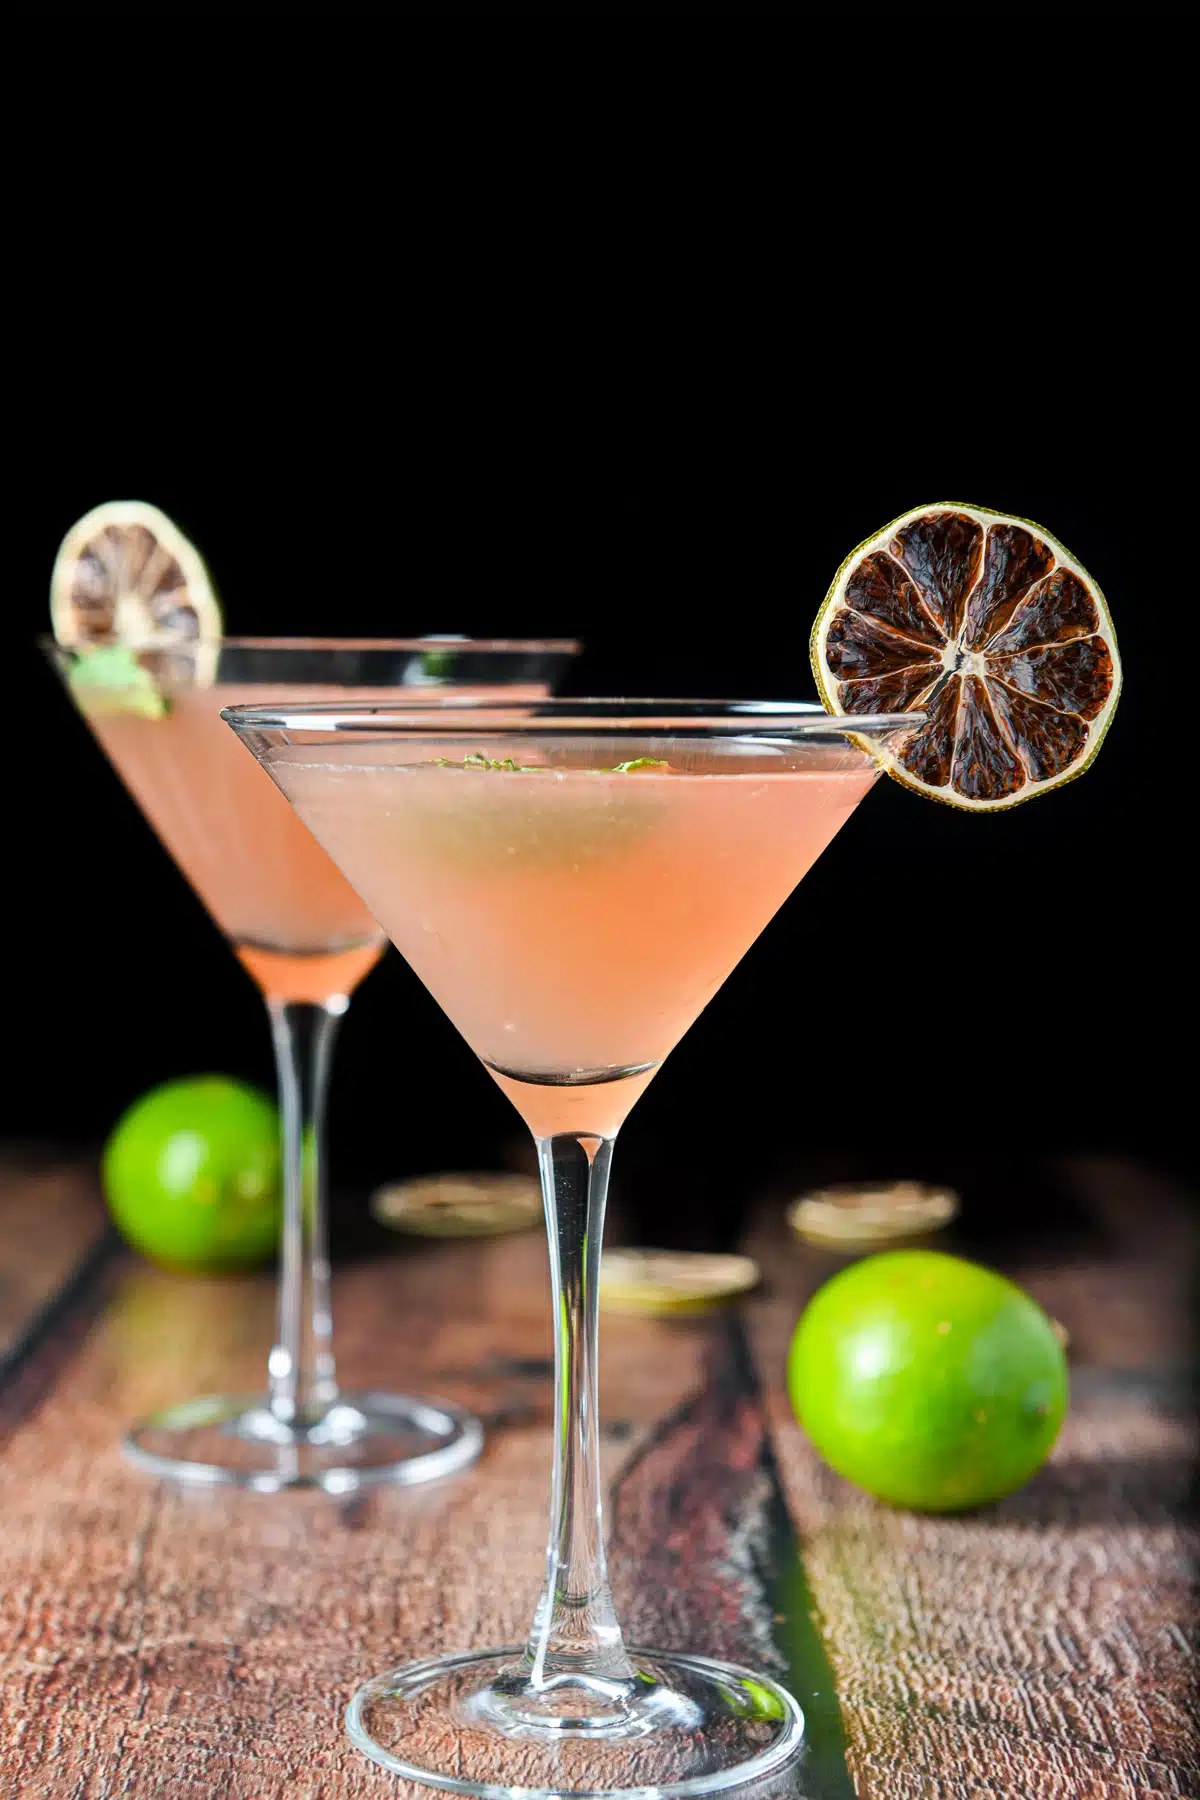 Vertical view of the berry martini with limes on the table